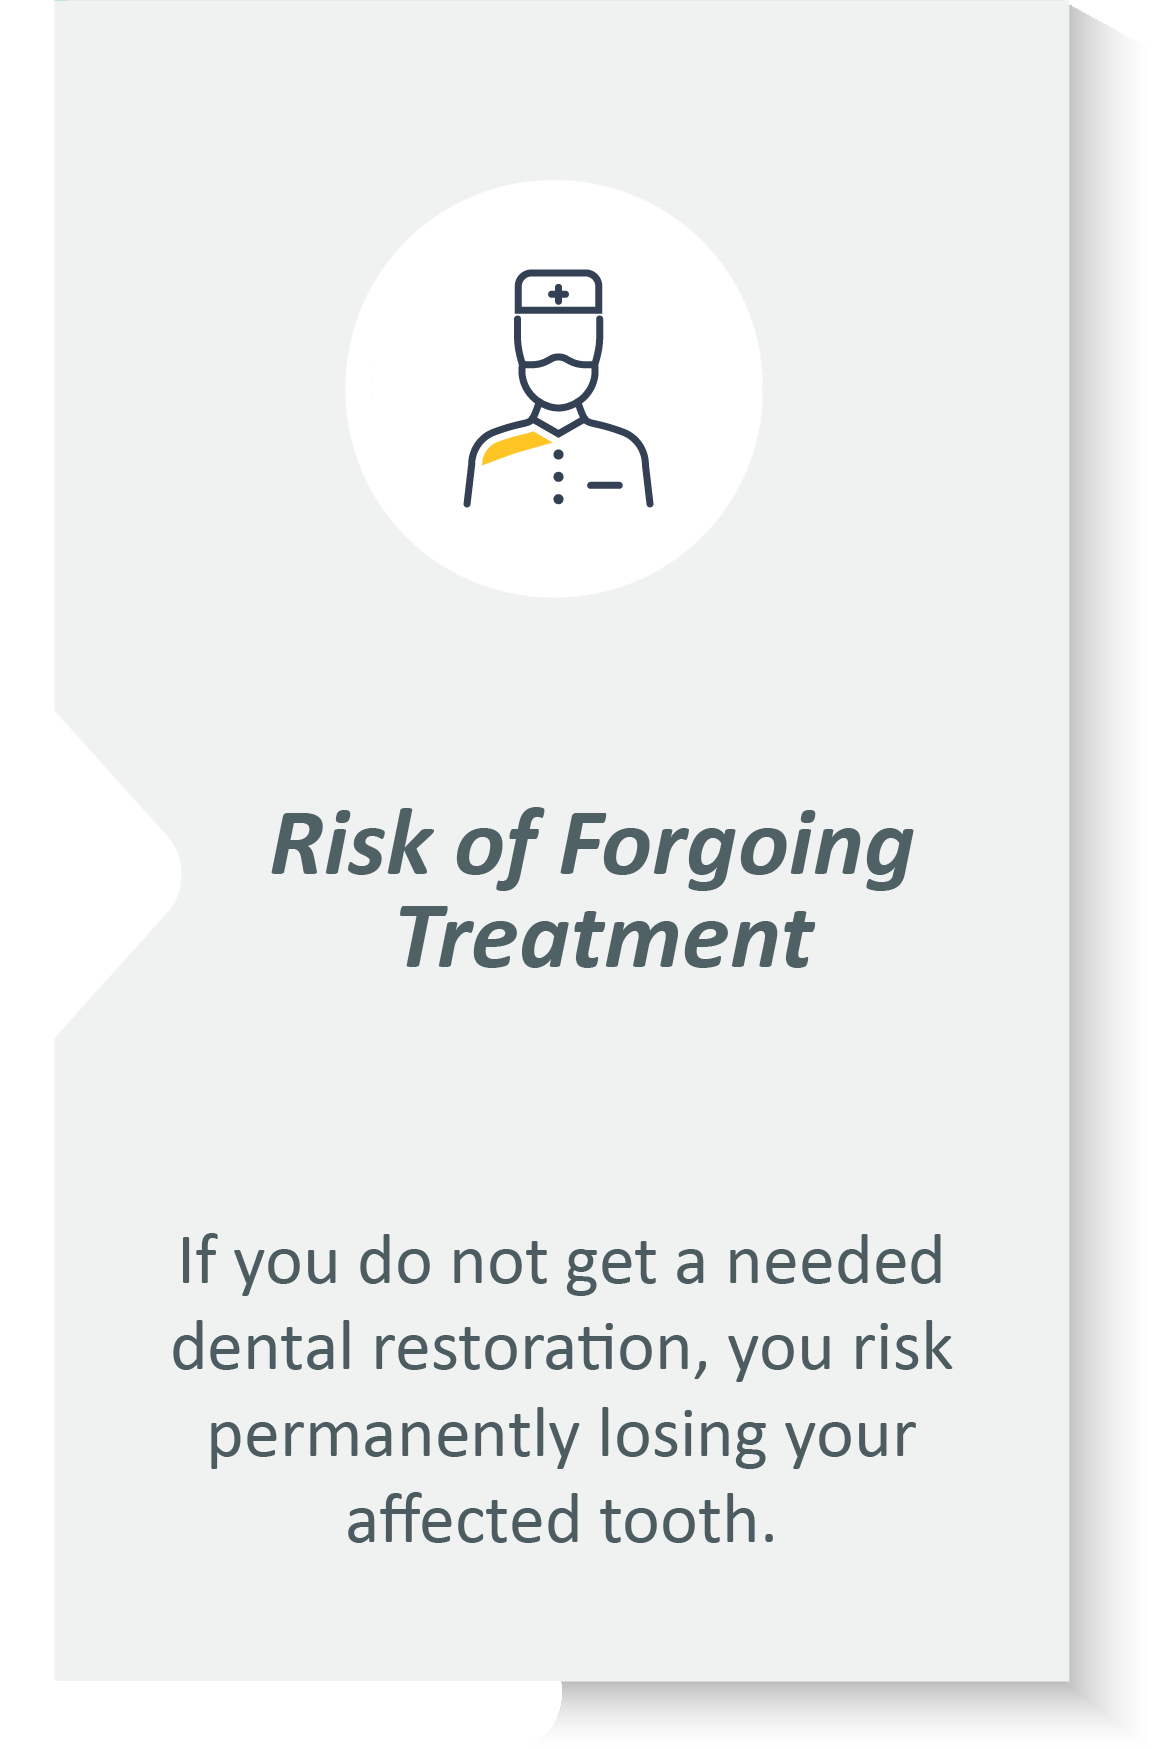 Dental restorations infographic: If you do not get a needed dental restoration, you risk permanently losing your affected tooth.